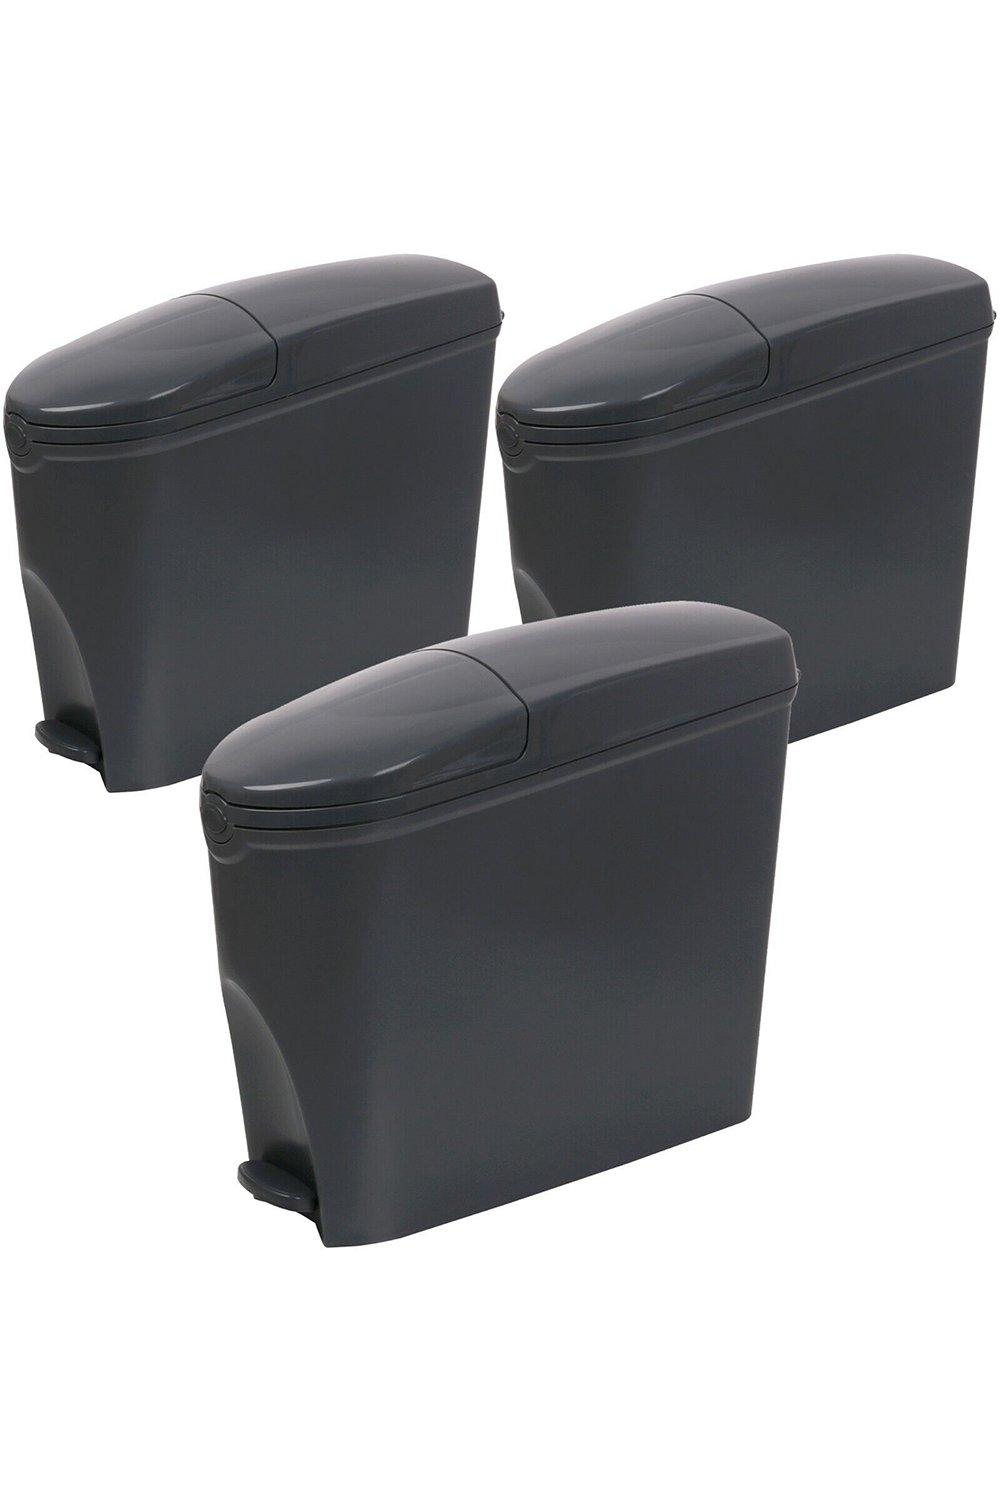 Grey Pedal Operated Toilet Sanitary Bin 3 x 20 Litre Capacity